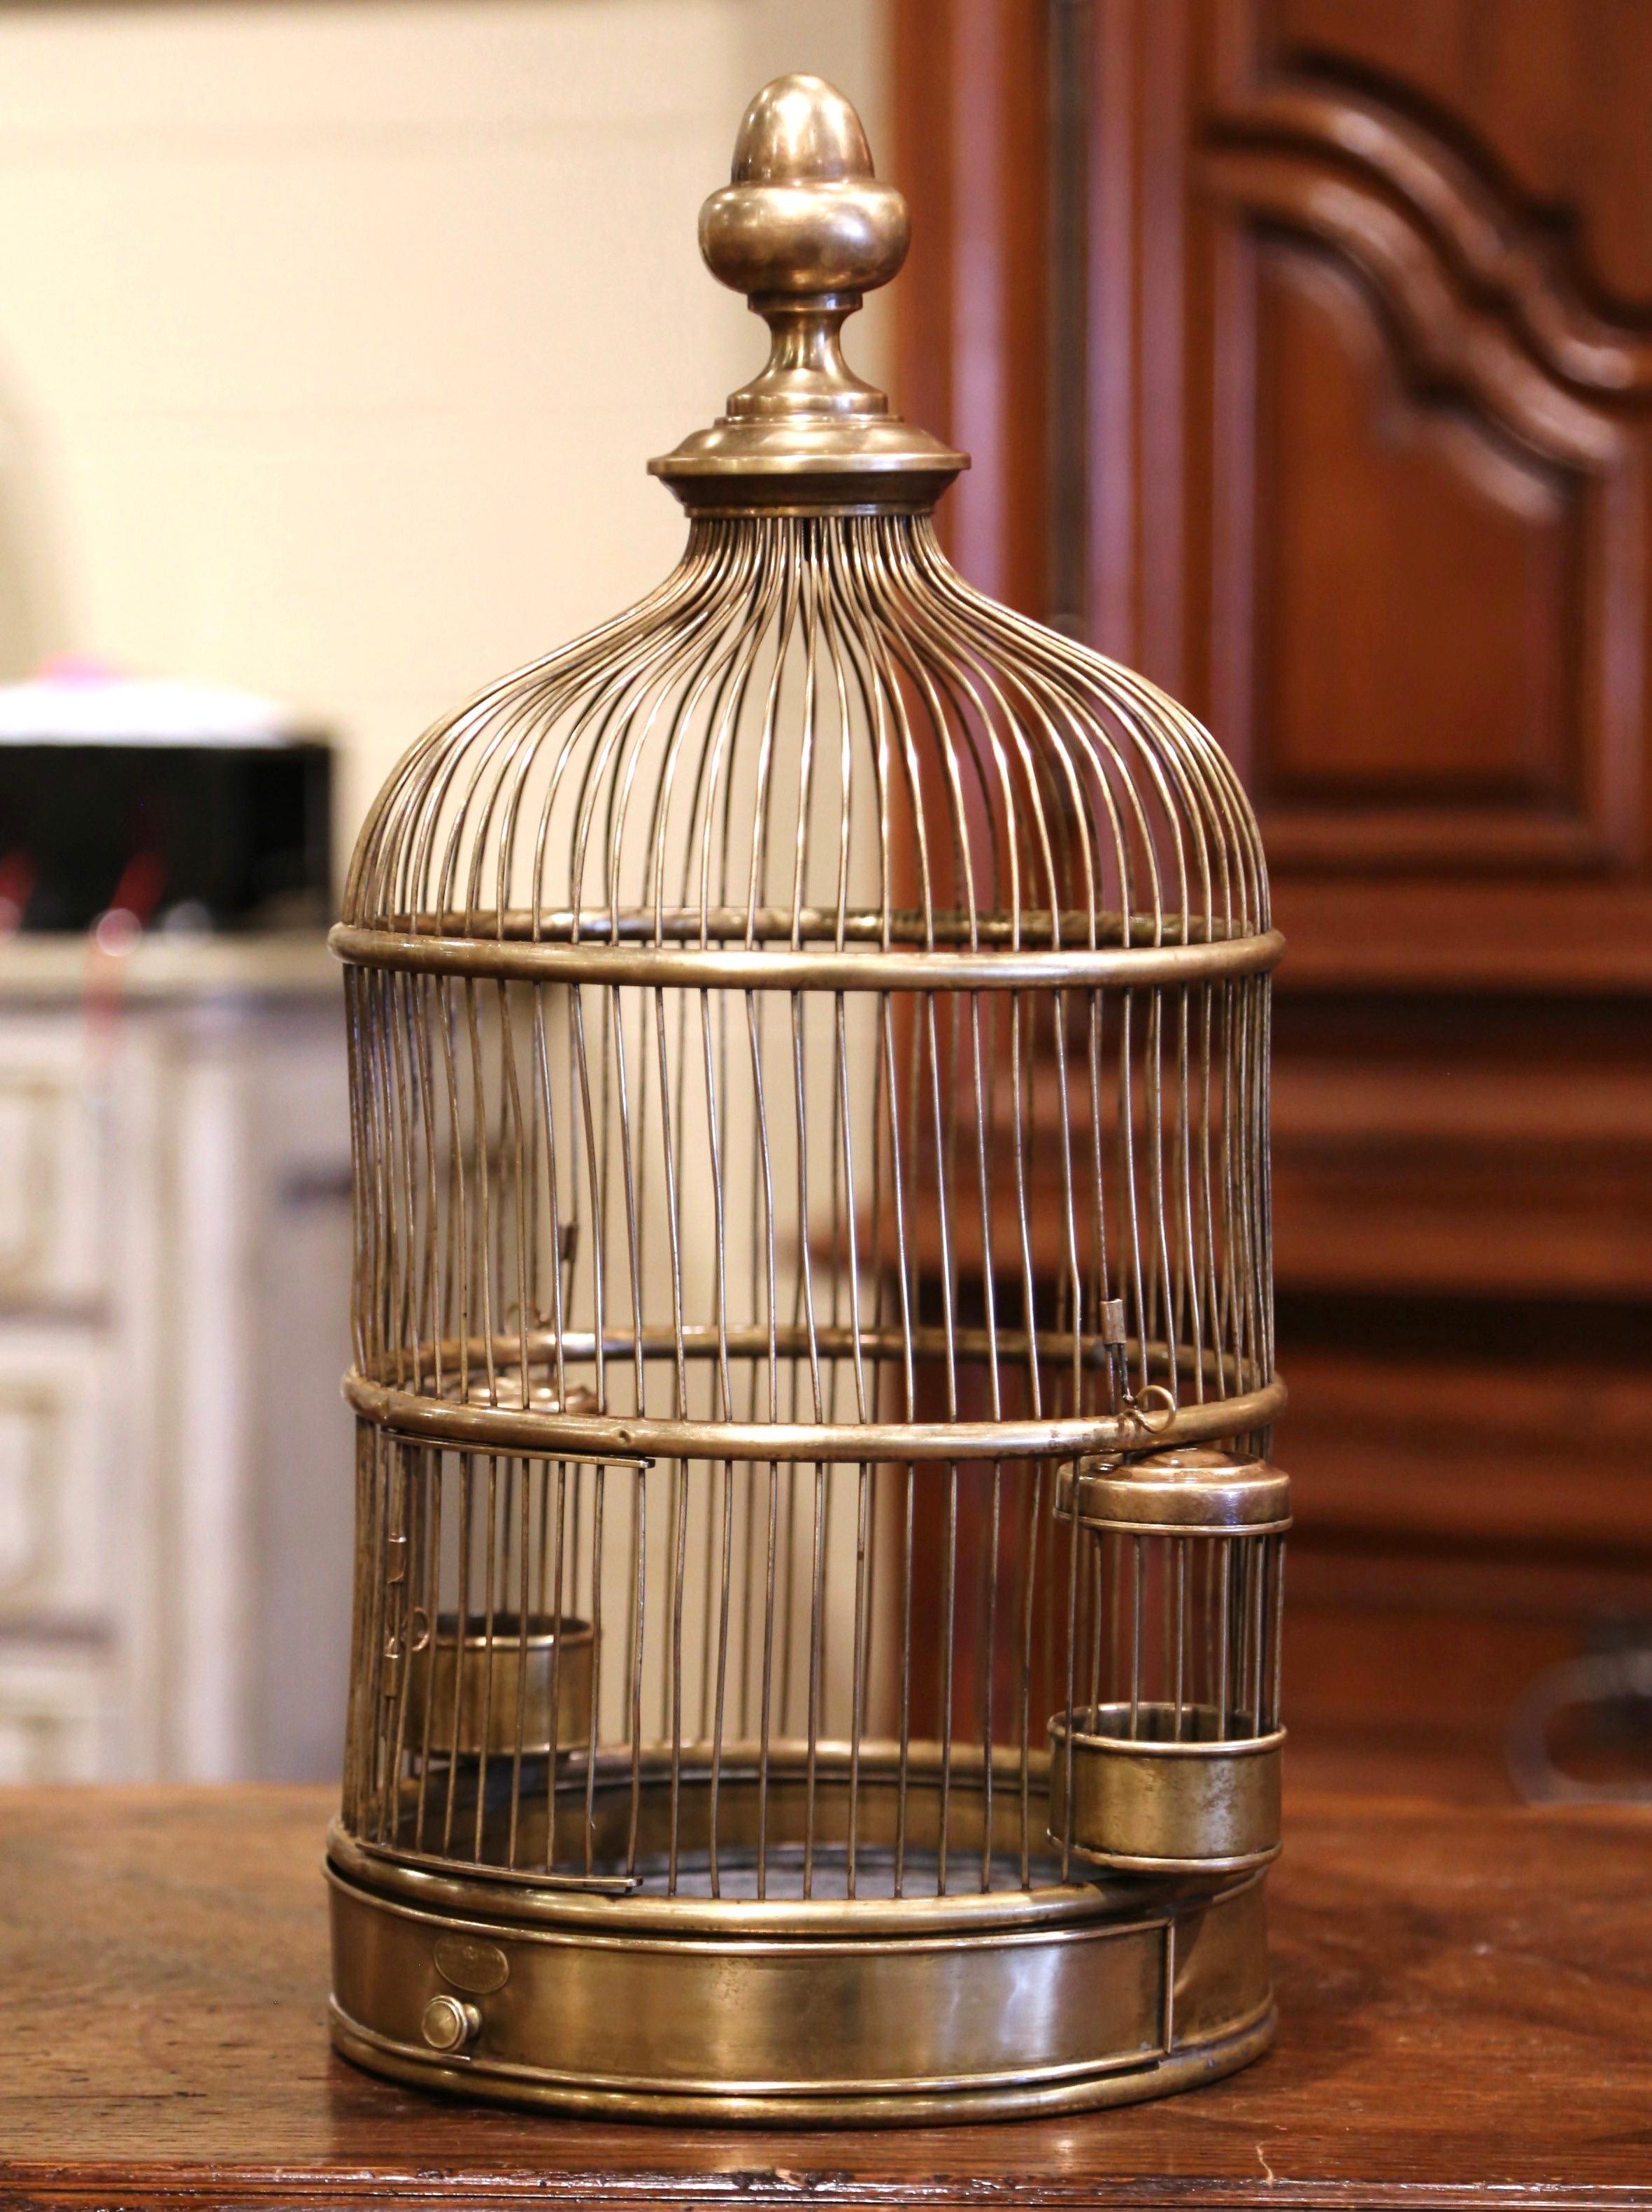 Decorate your home with this whimsical antique bird cage. Crafted in the Alsace Lorraine region of France, circa 1920, this Napoleon III cage made of brass, is cylindrical in shape and topped with a rounded dome embellished with a decorative finial.